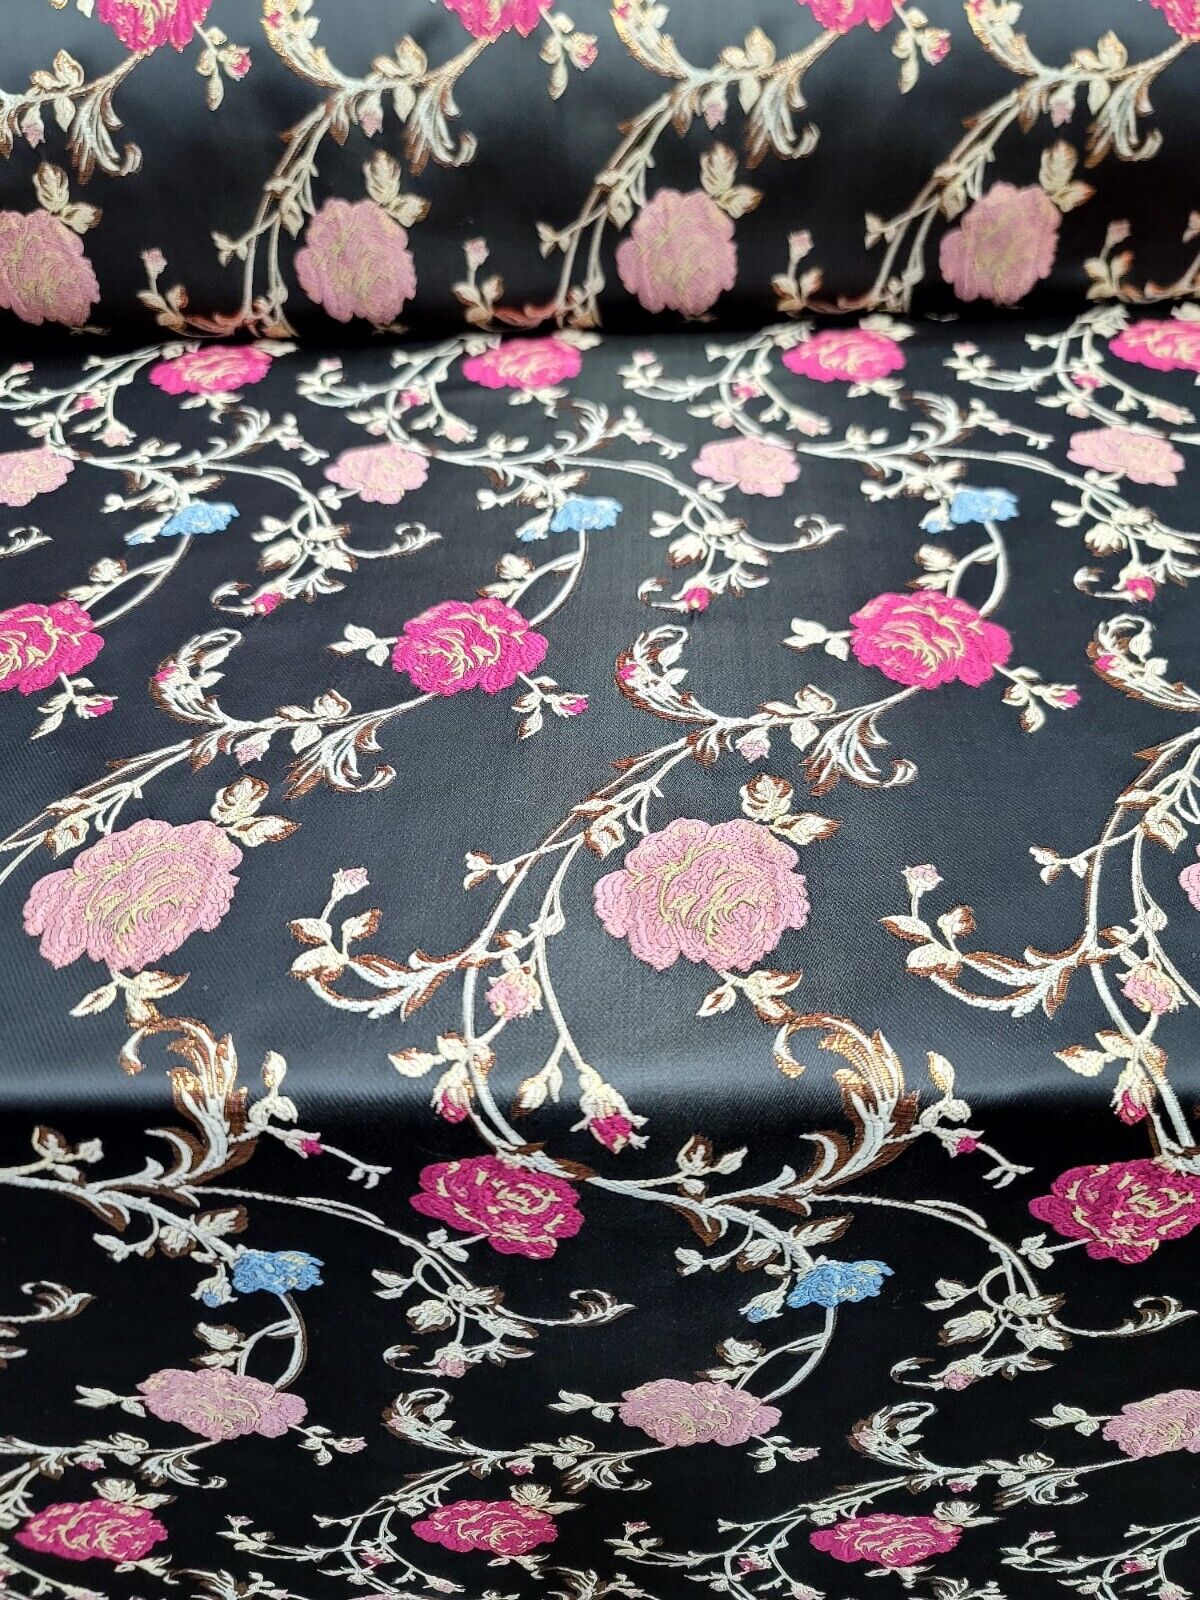 Black Brocade Fabric by the Yard - Exquisite Floral Pattern in Pink, Gold, and Blue - Perfect for Dresses and Upholstery